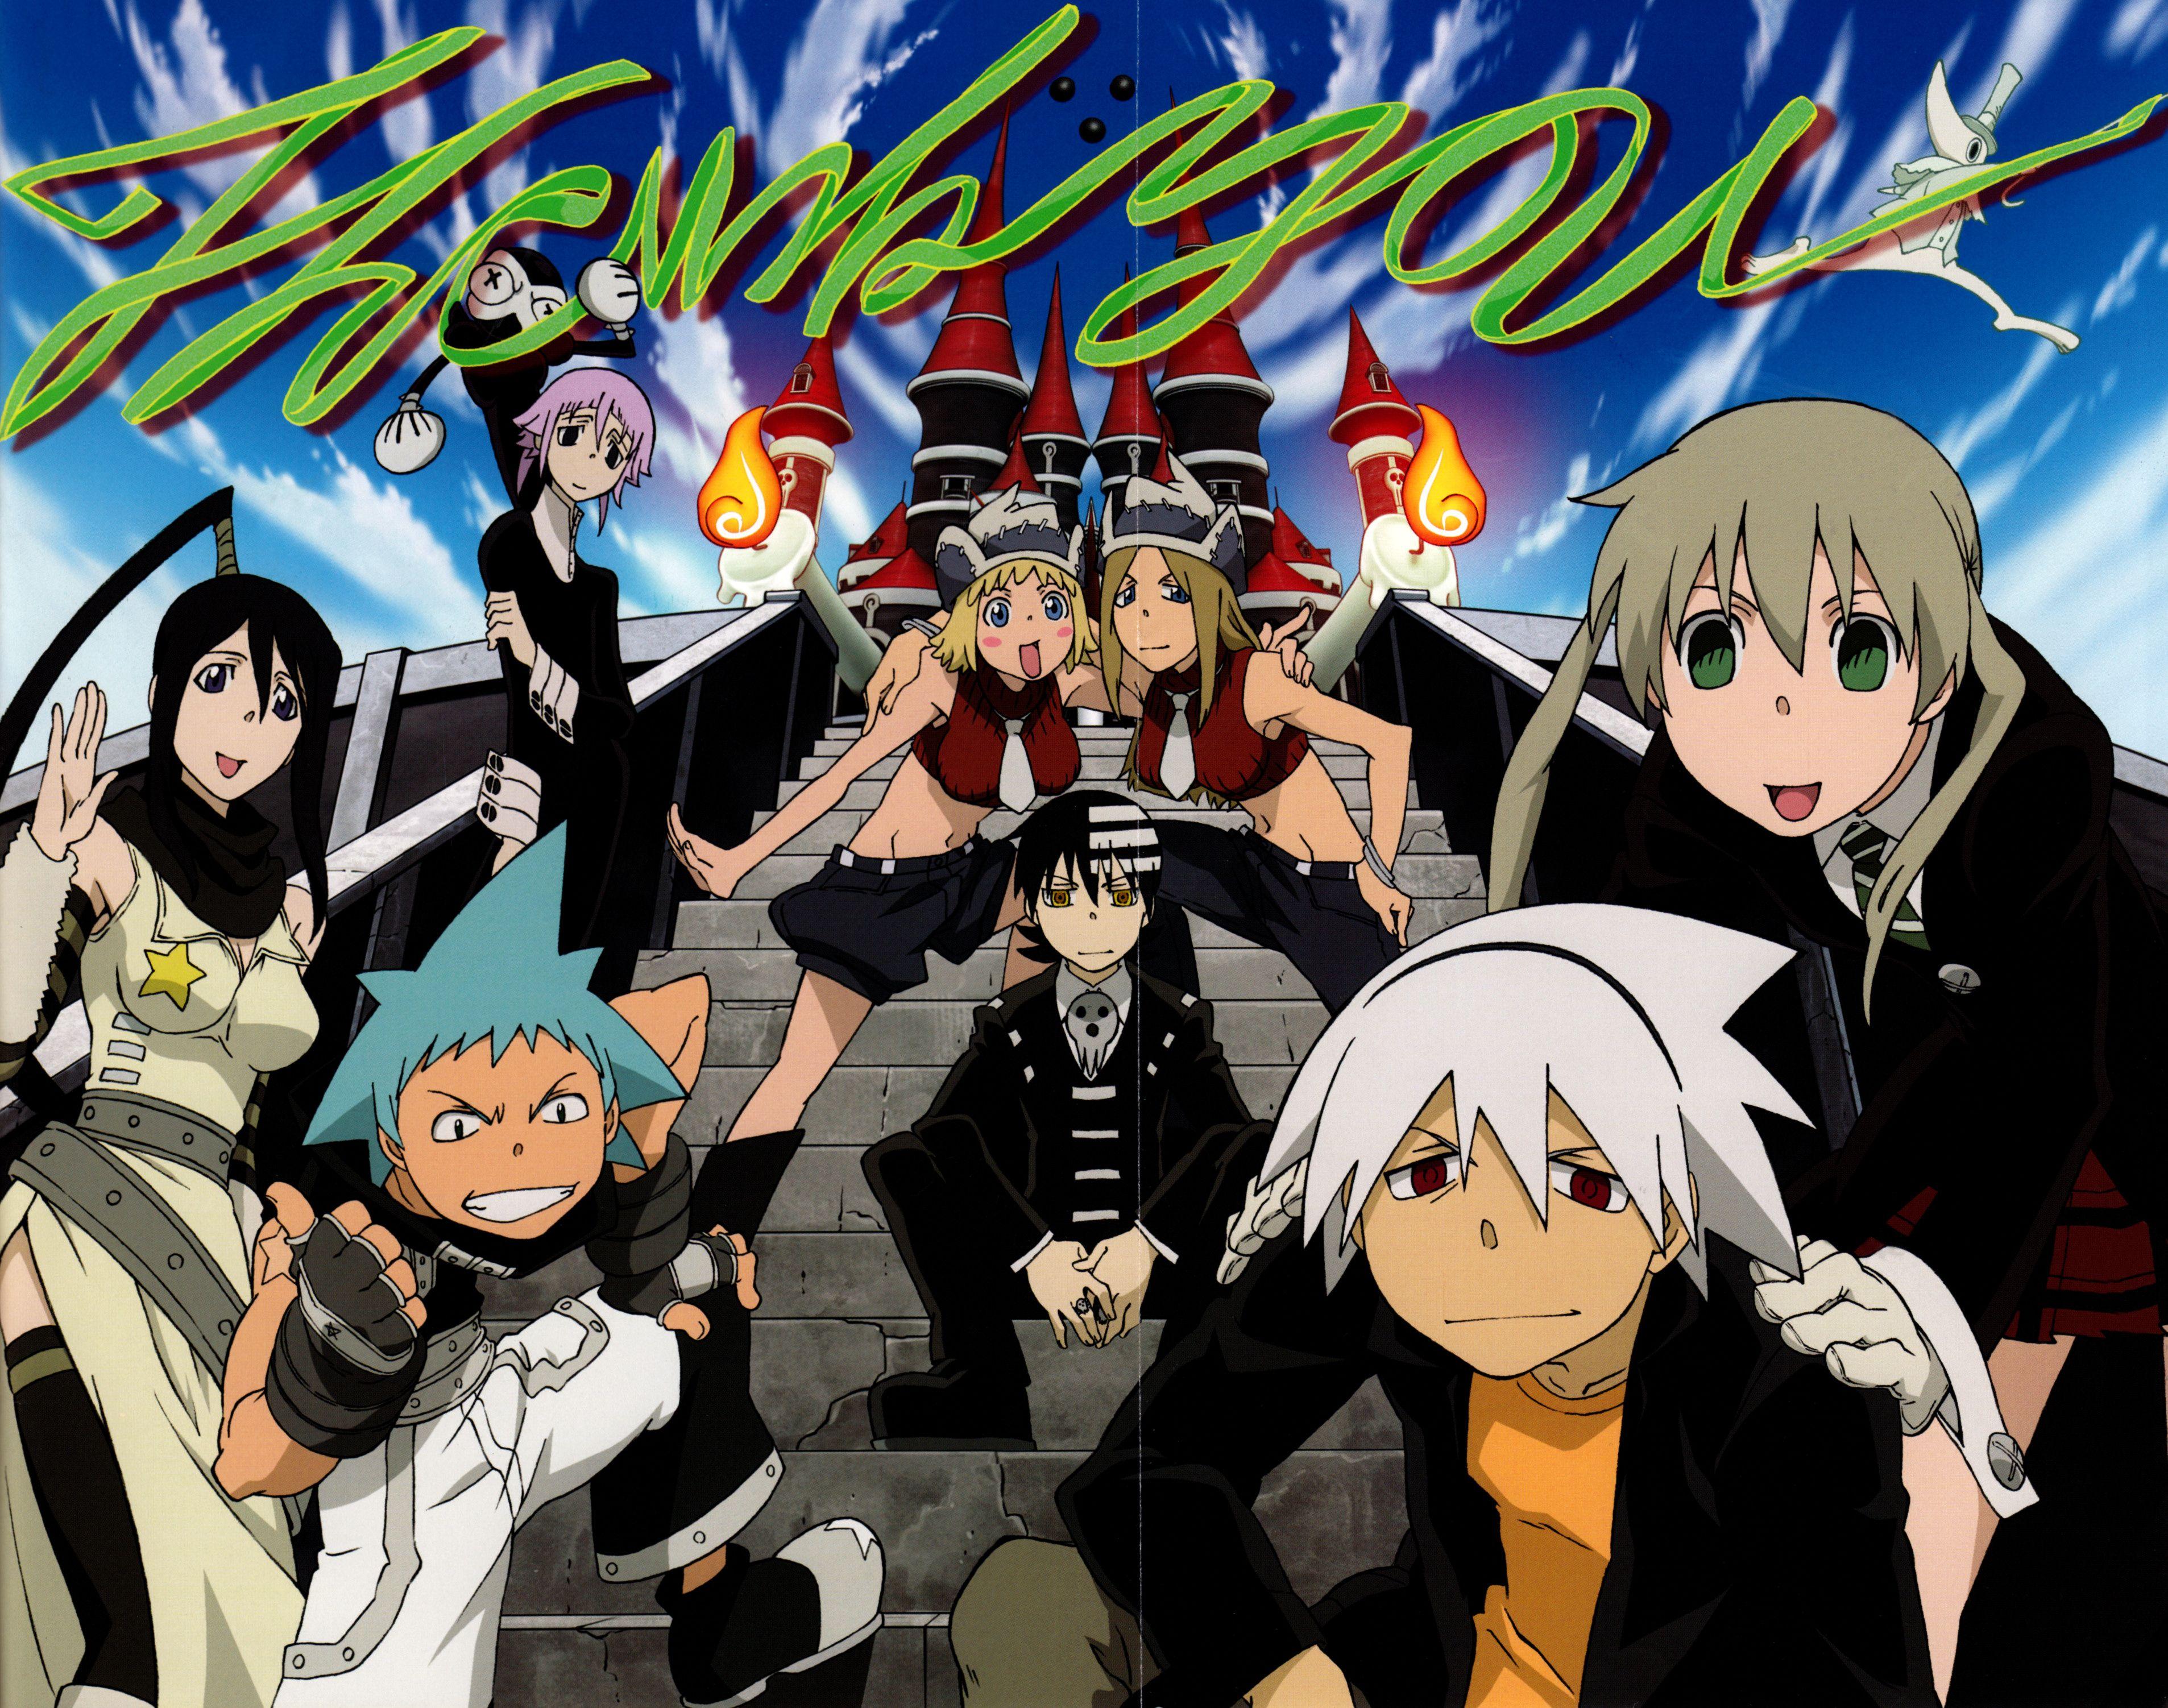 anime characters design  Buscar con Google  Soul eater cosplay Soul eater  manga Soul eater funny